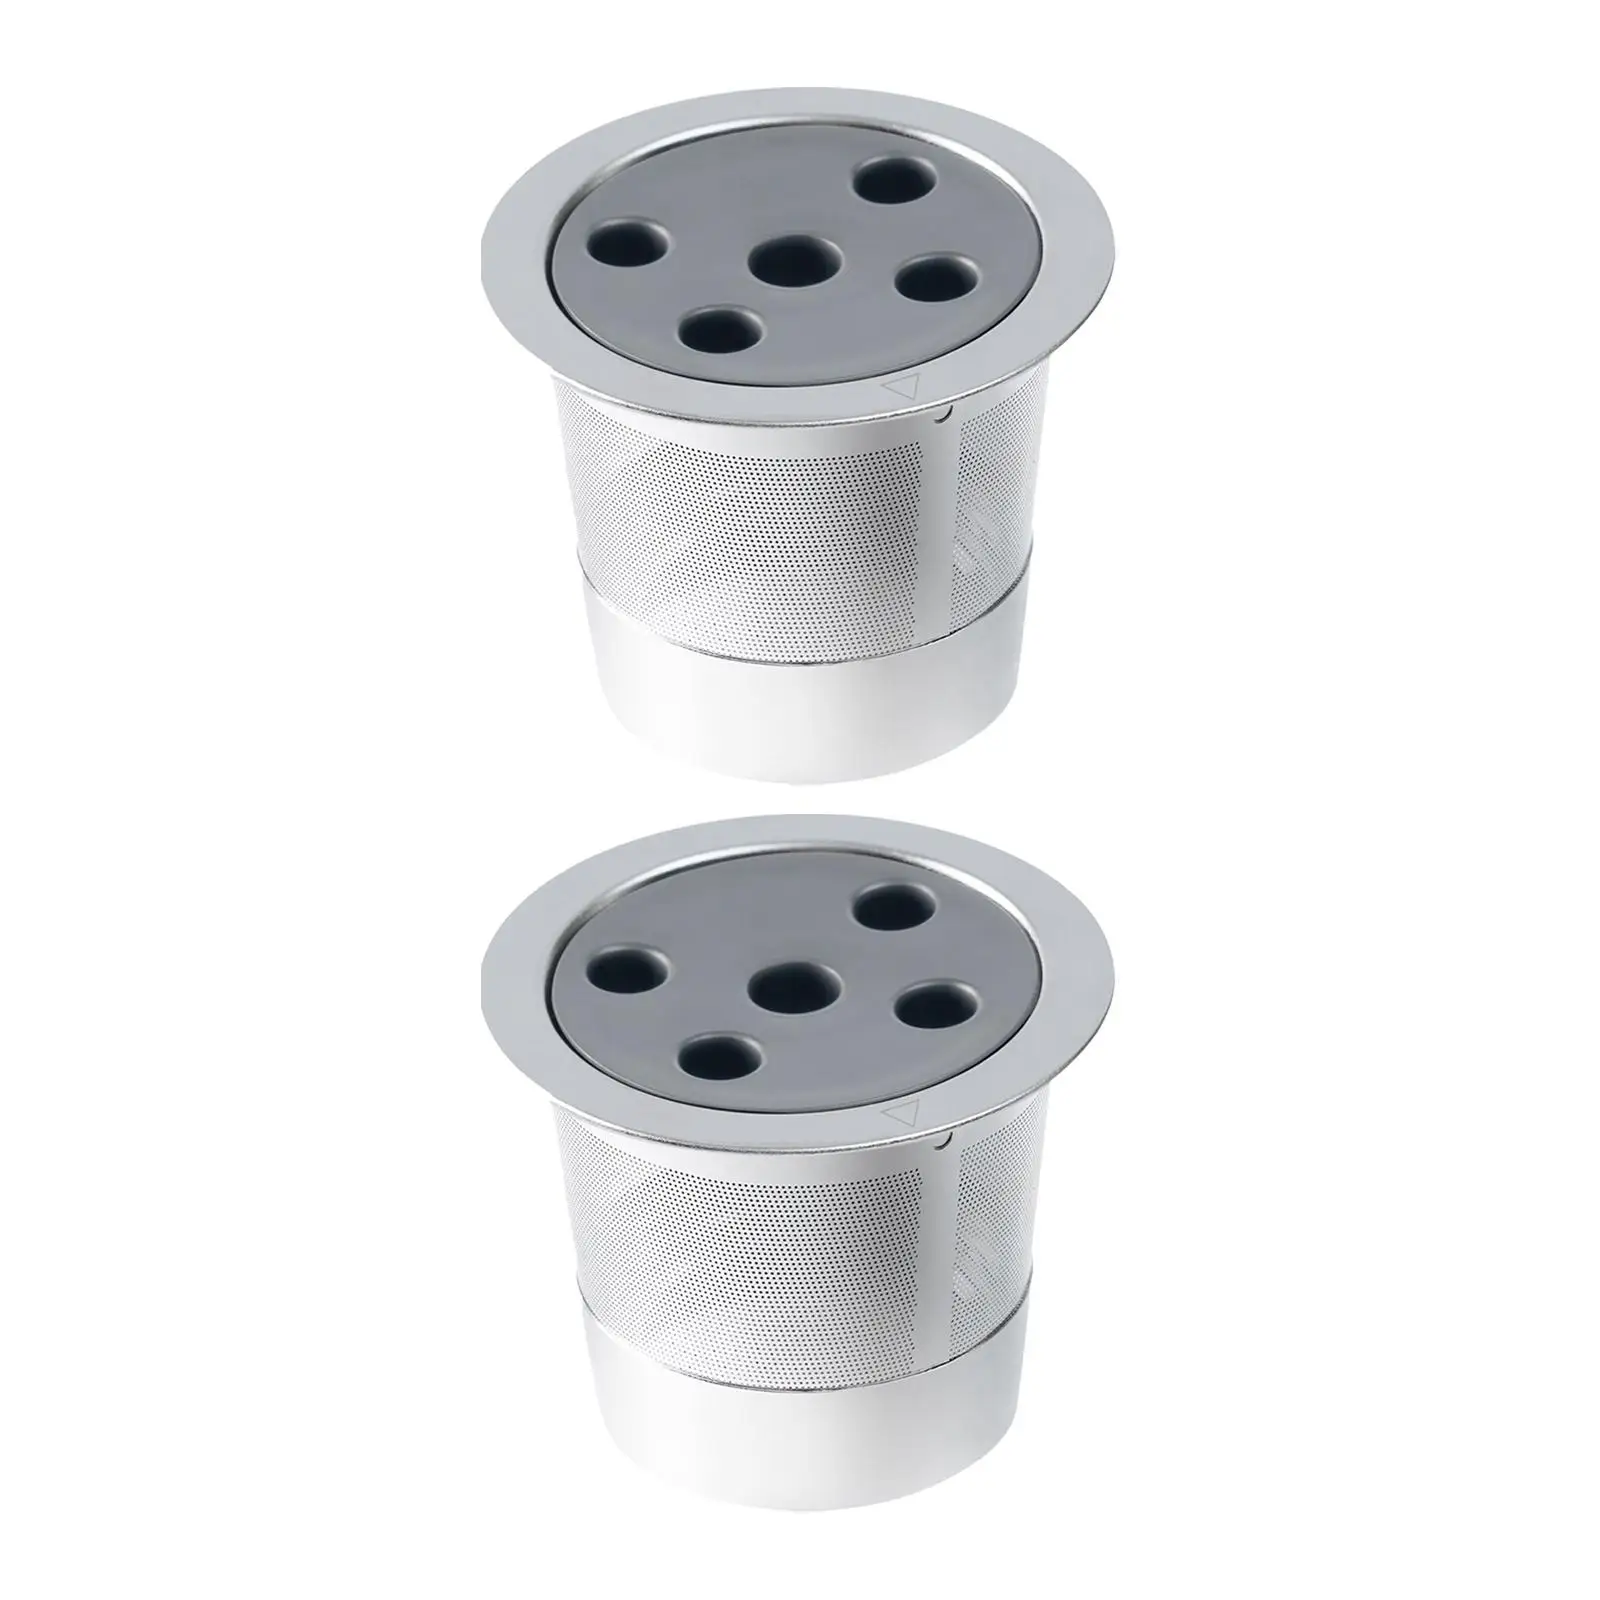 2 Pieces Coffee Pod Capsule Single Serve Replacement for Coffee Makers